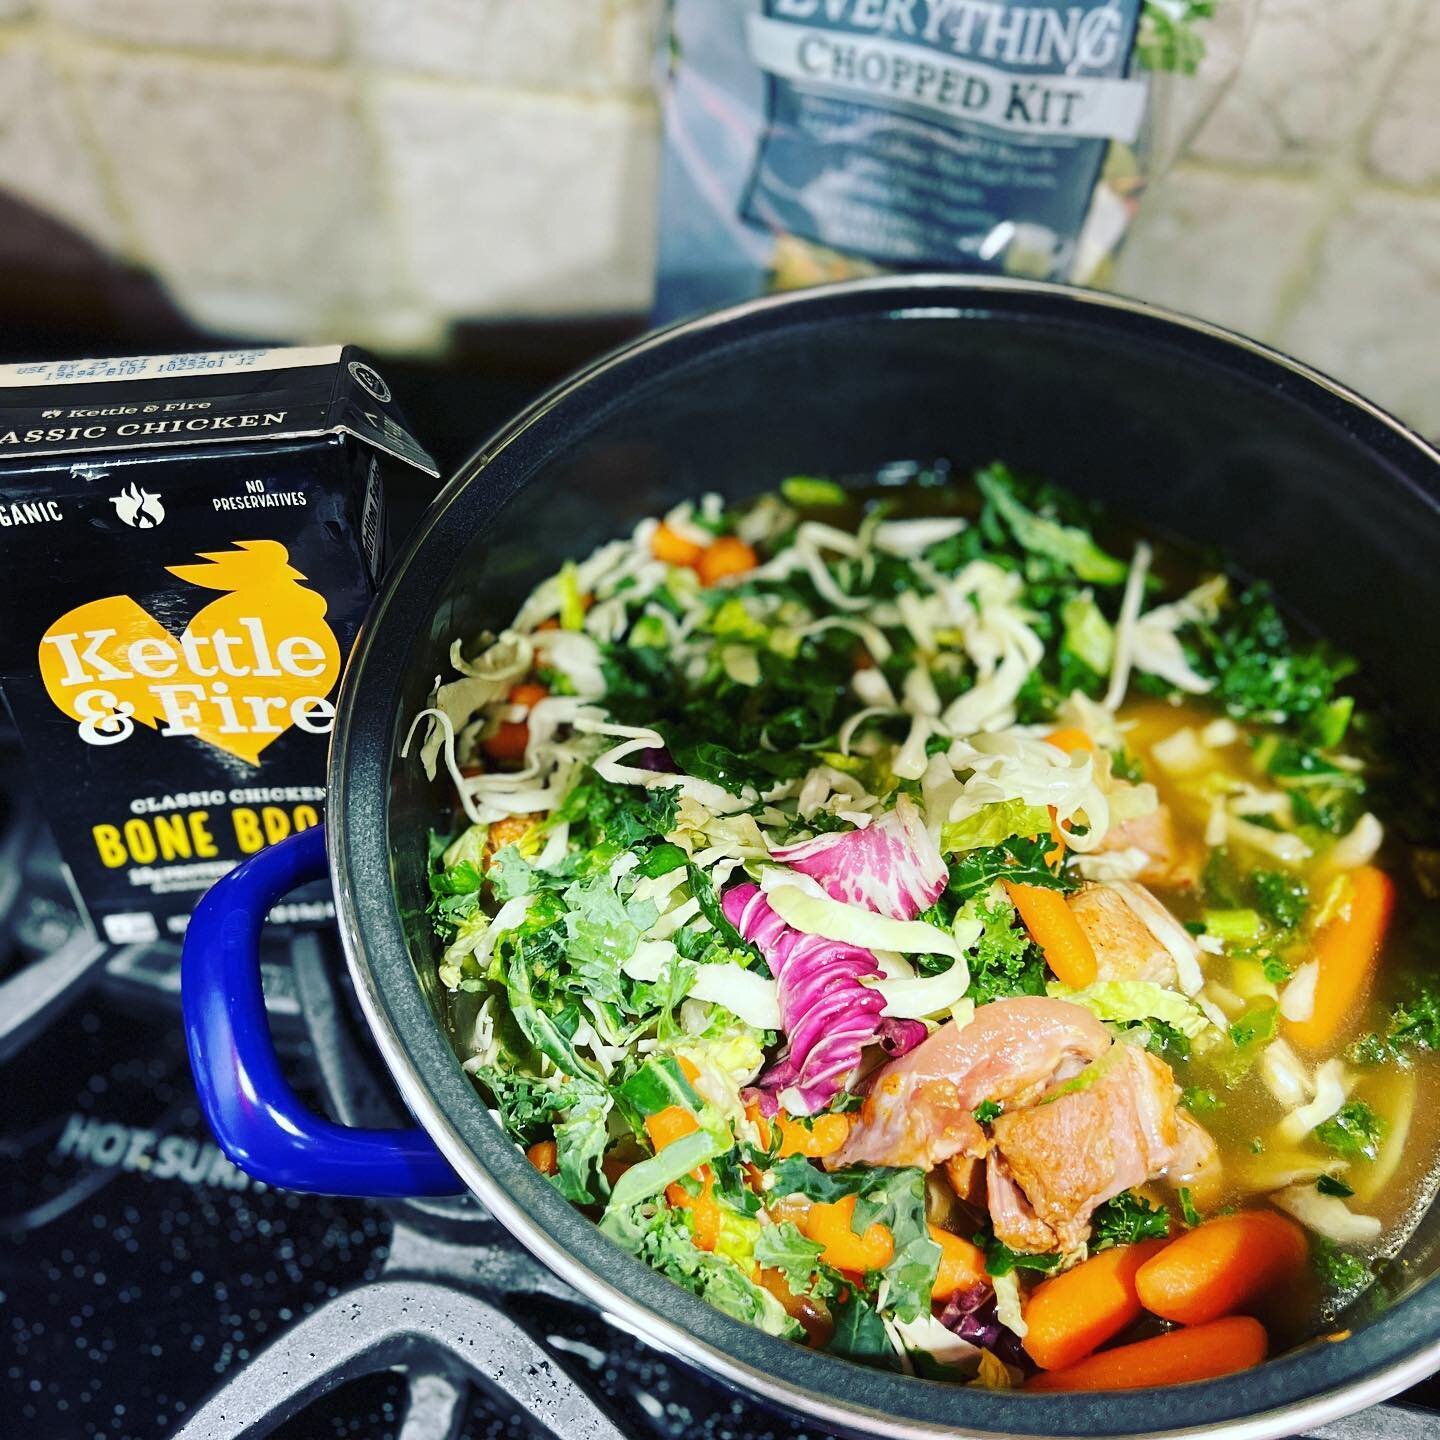 No Excuses Monday...🍲Are you starting the week off with a healthy meal prep for dinner?

🍲If I can get up early on Monday and prep this healthy soup for dinner ... so can you!

Ingredients:
2 boxes of Bone broth
1 bag of Chopped kale/ cabbage kit
1